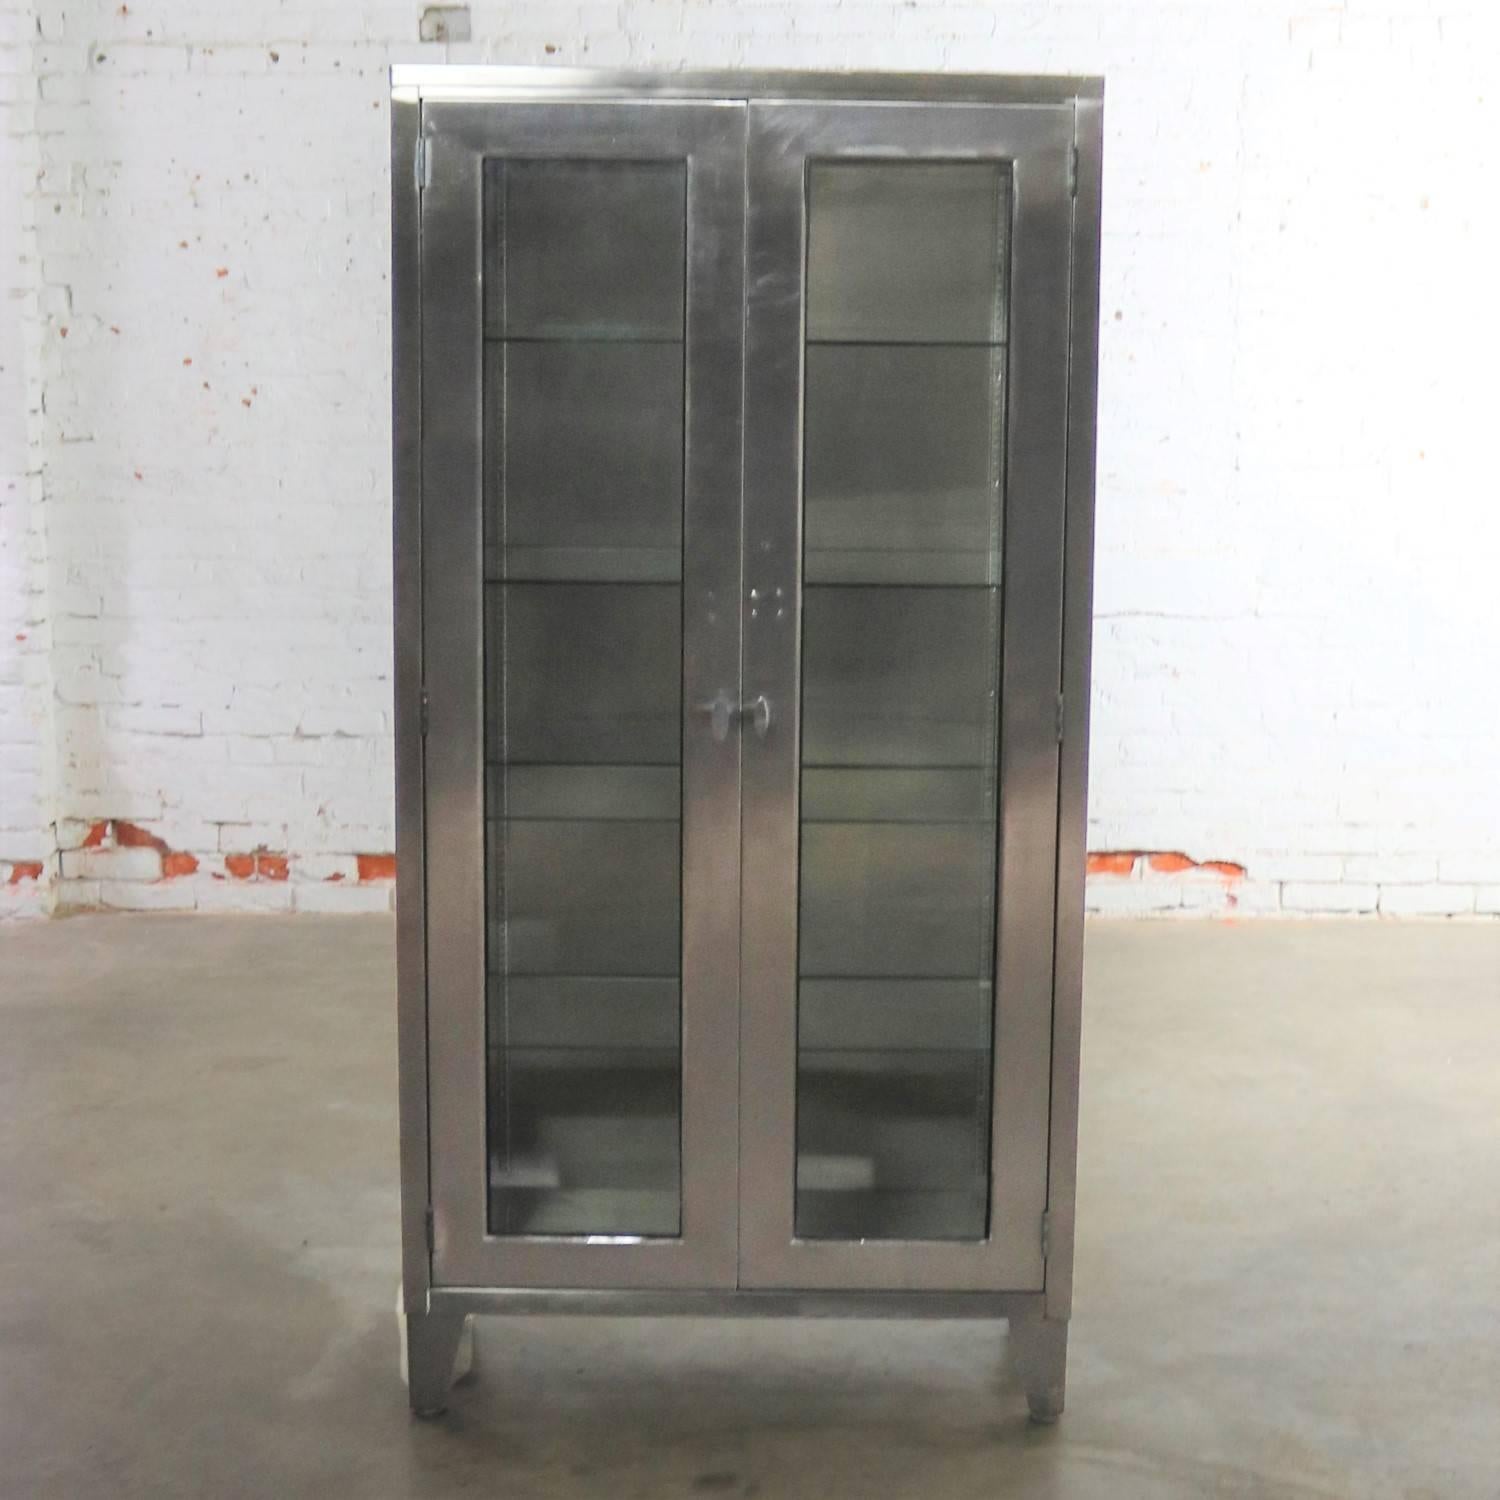 Incredible industrial stainless-steel medical or apothecary cabinet with glass doors, sides, and shelves that allow it to make the best display cabinet ever. It is in exceptional vintage condition. Any imperfections, i.e. scratches and dings, are